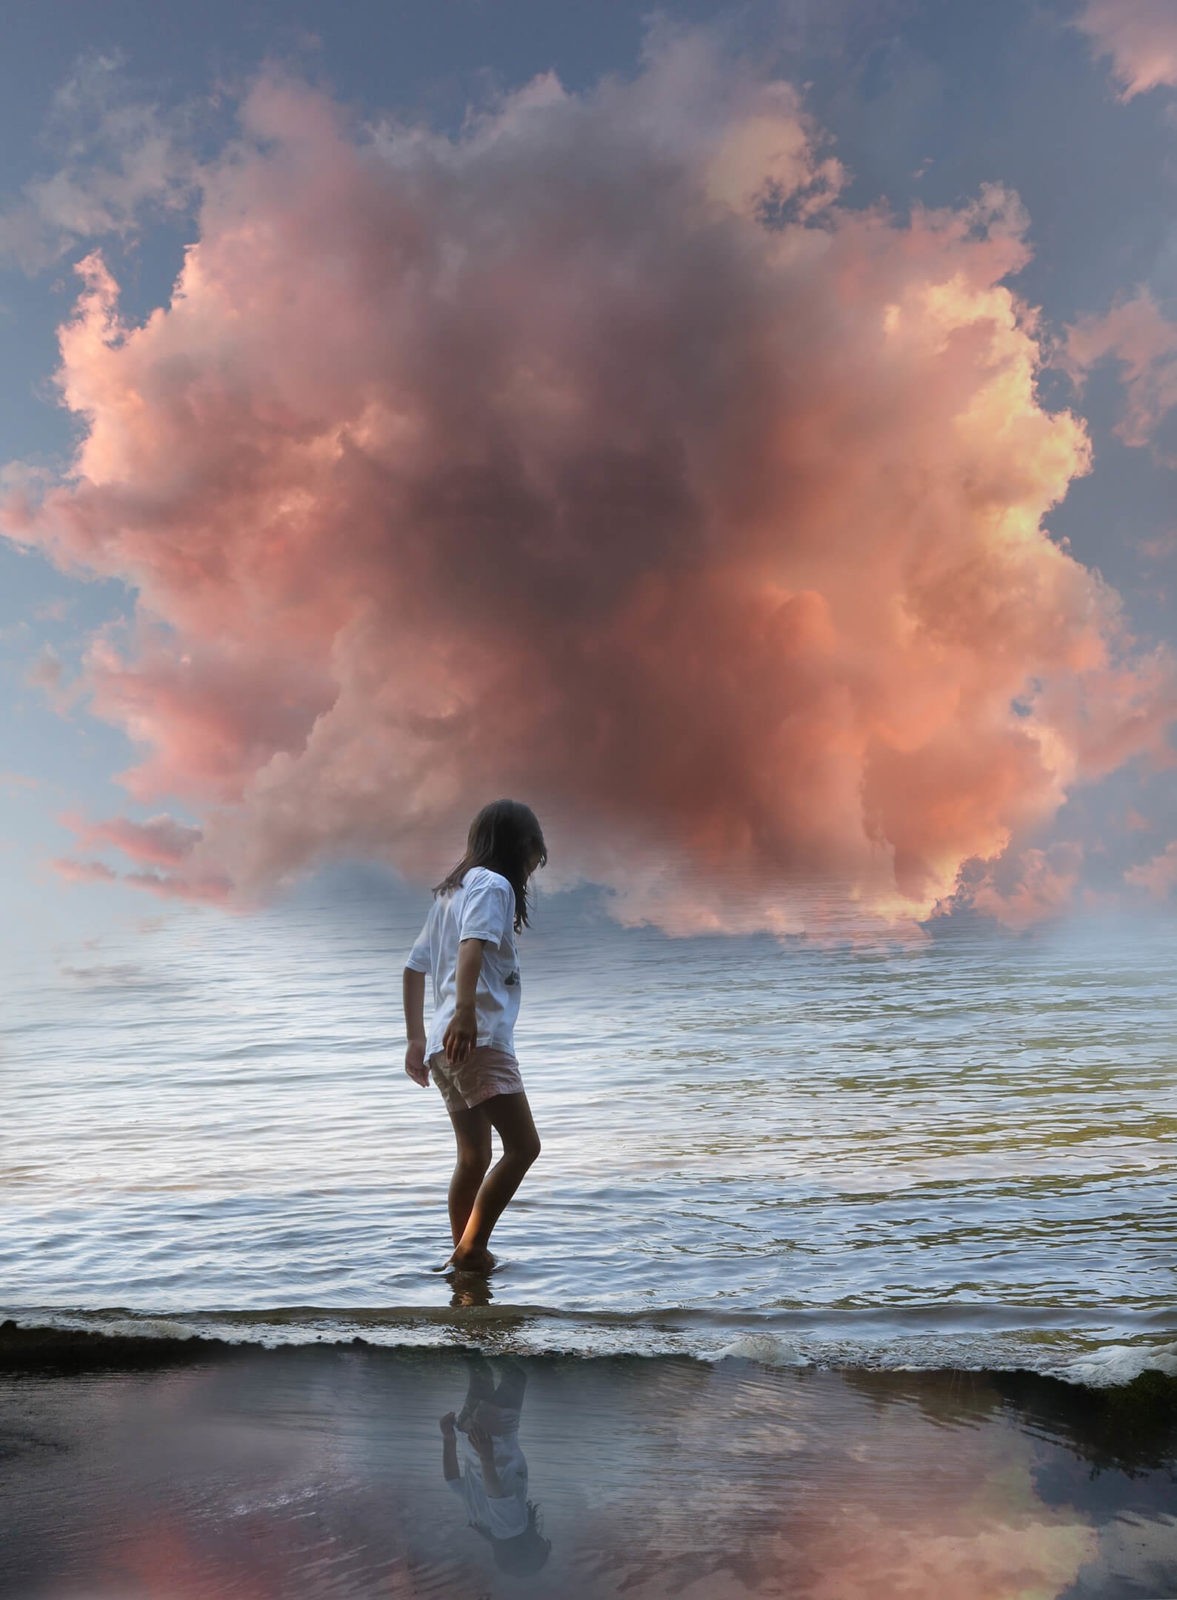 Robin Botie of Ithaca, New York, in a quest for joy, photoshops a lone girl with her head in a pink cloud.